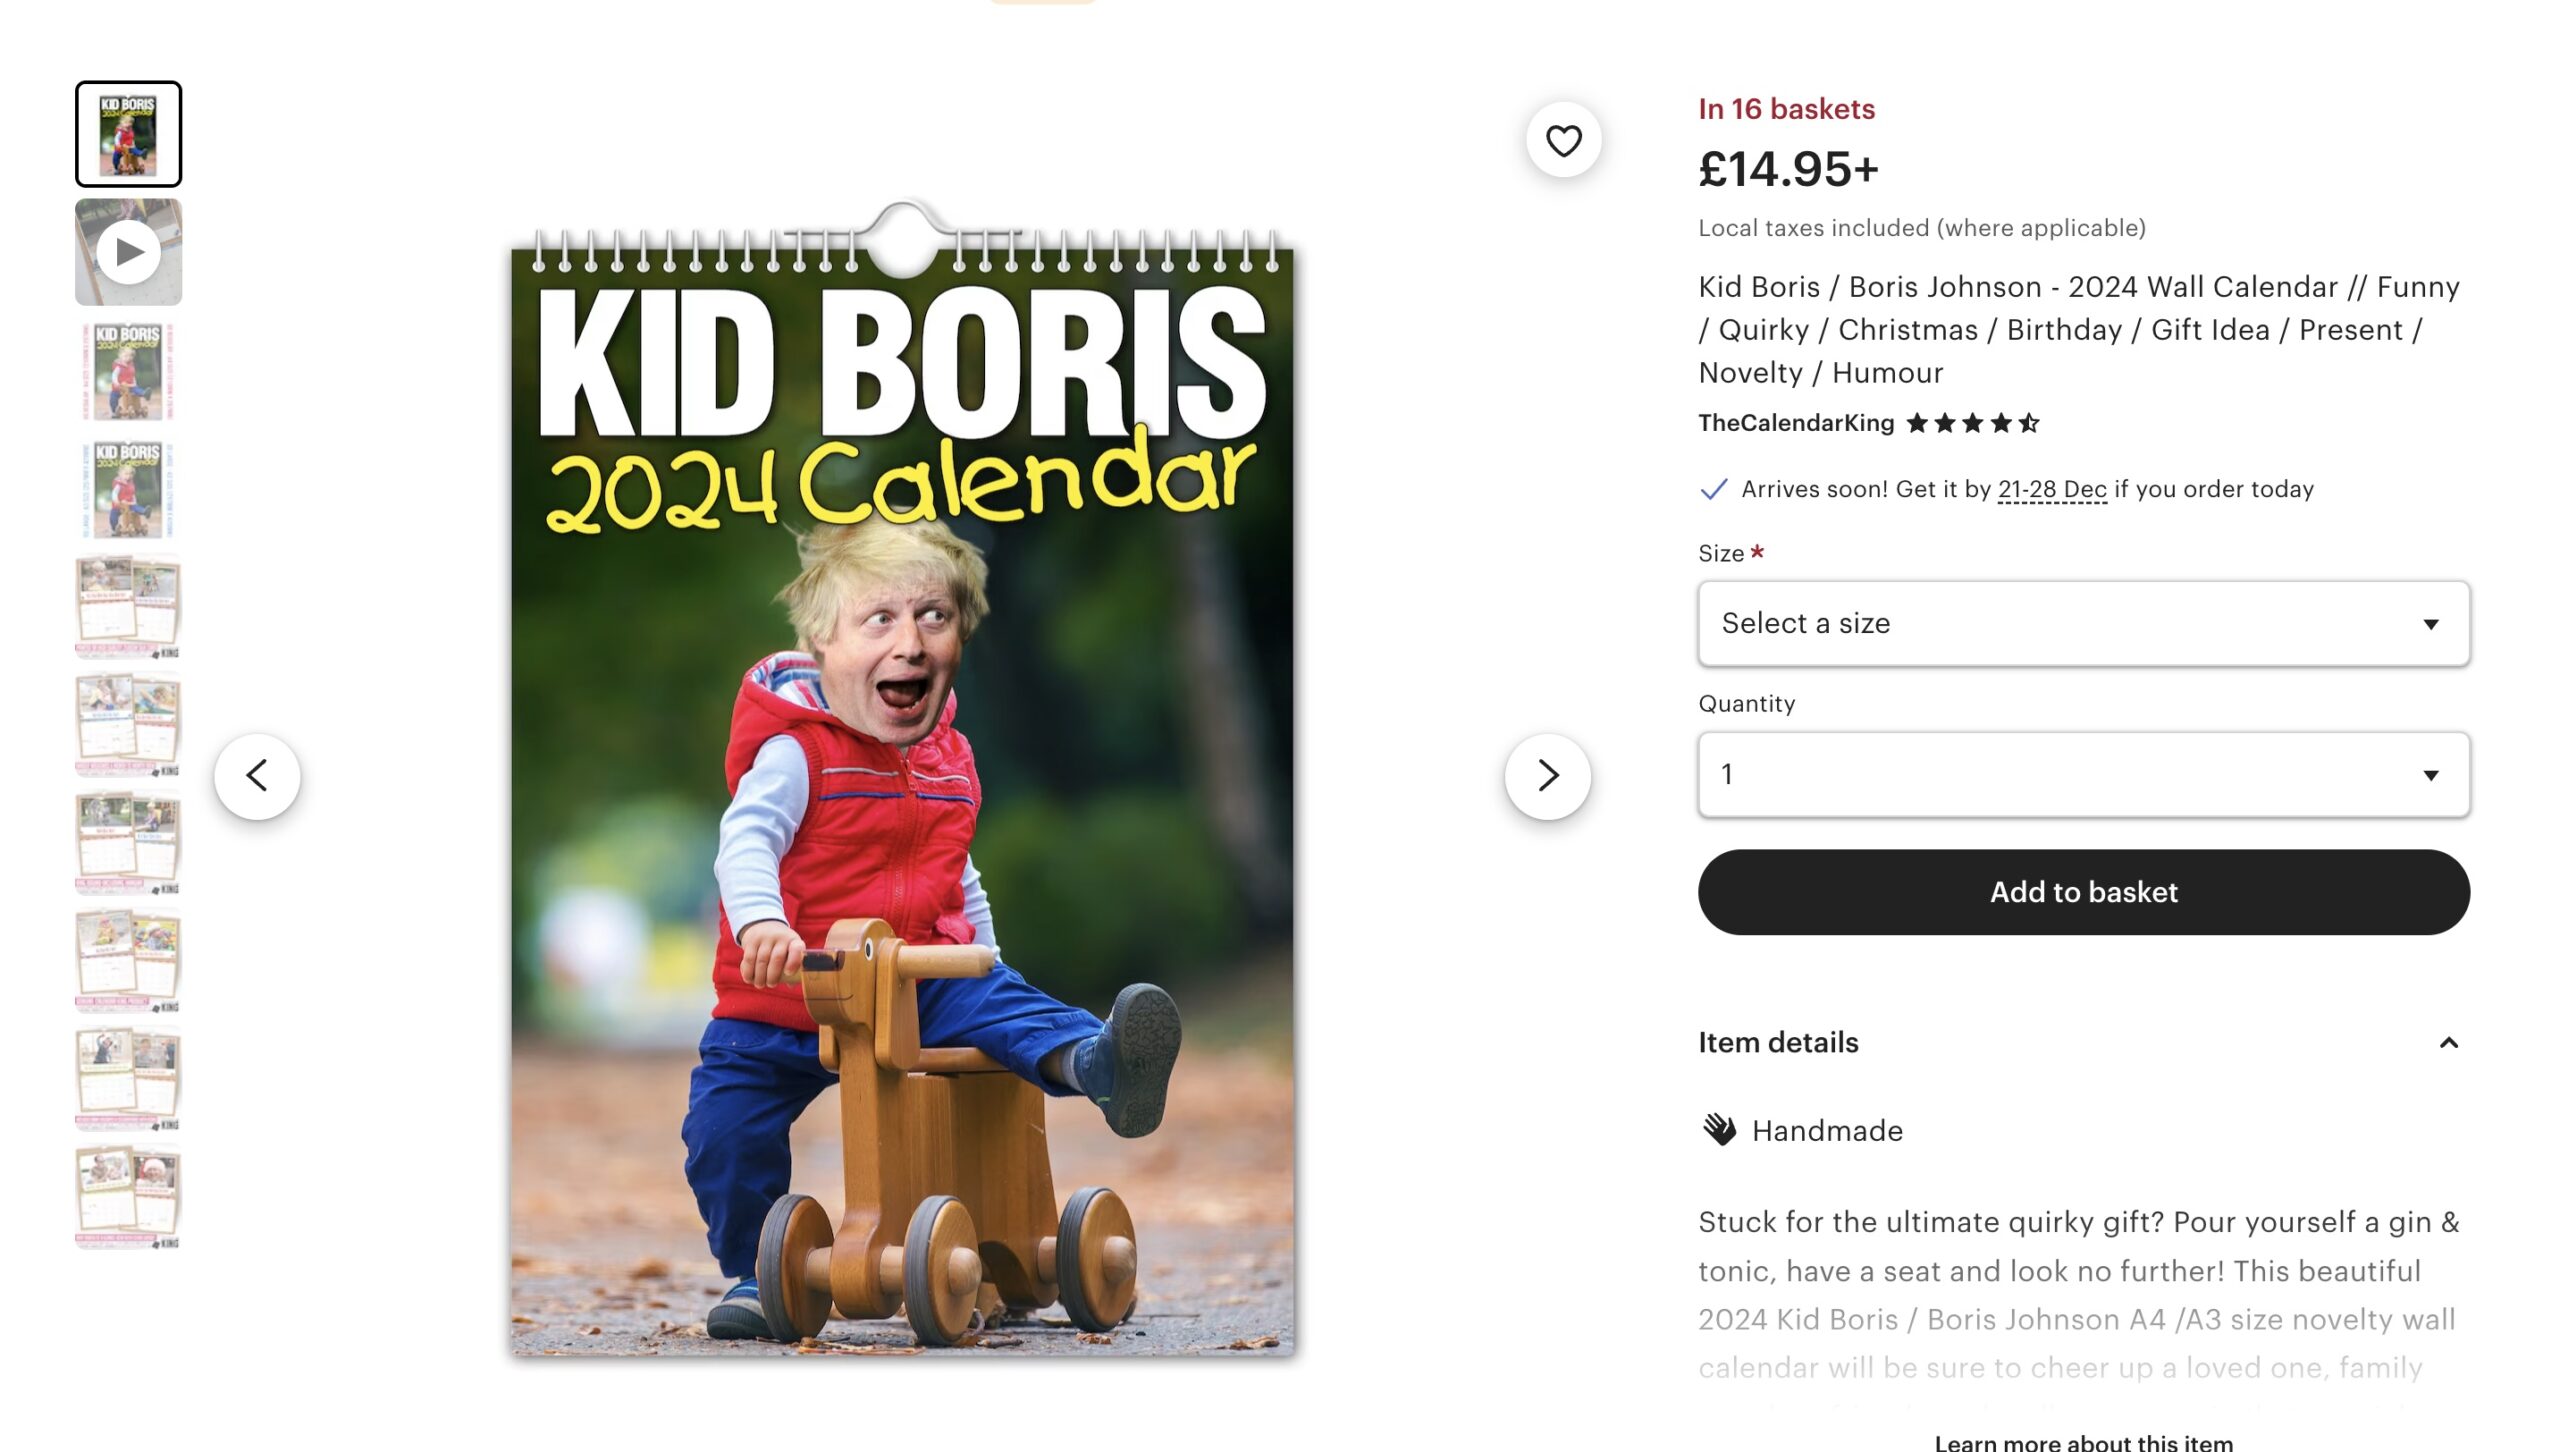 the hilarious ‘Baby’ Boris Johnson calendar for 2024 product page on the website.